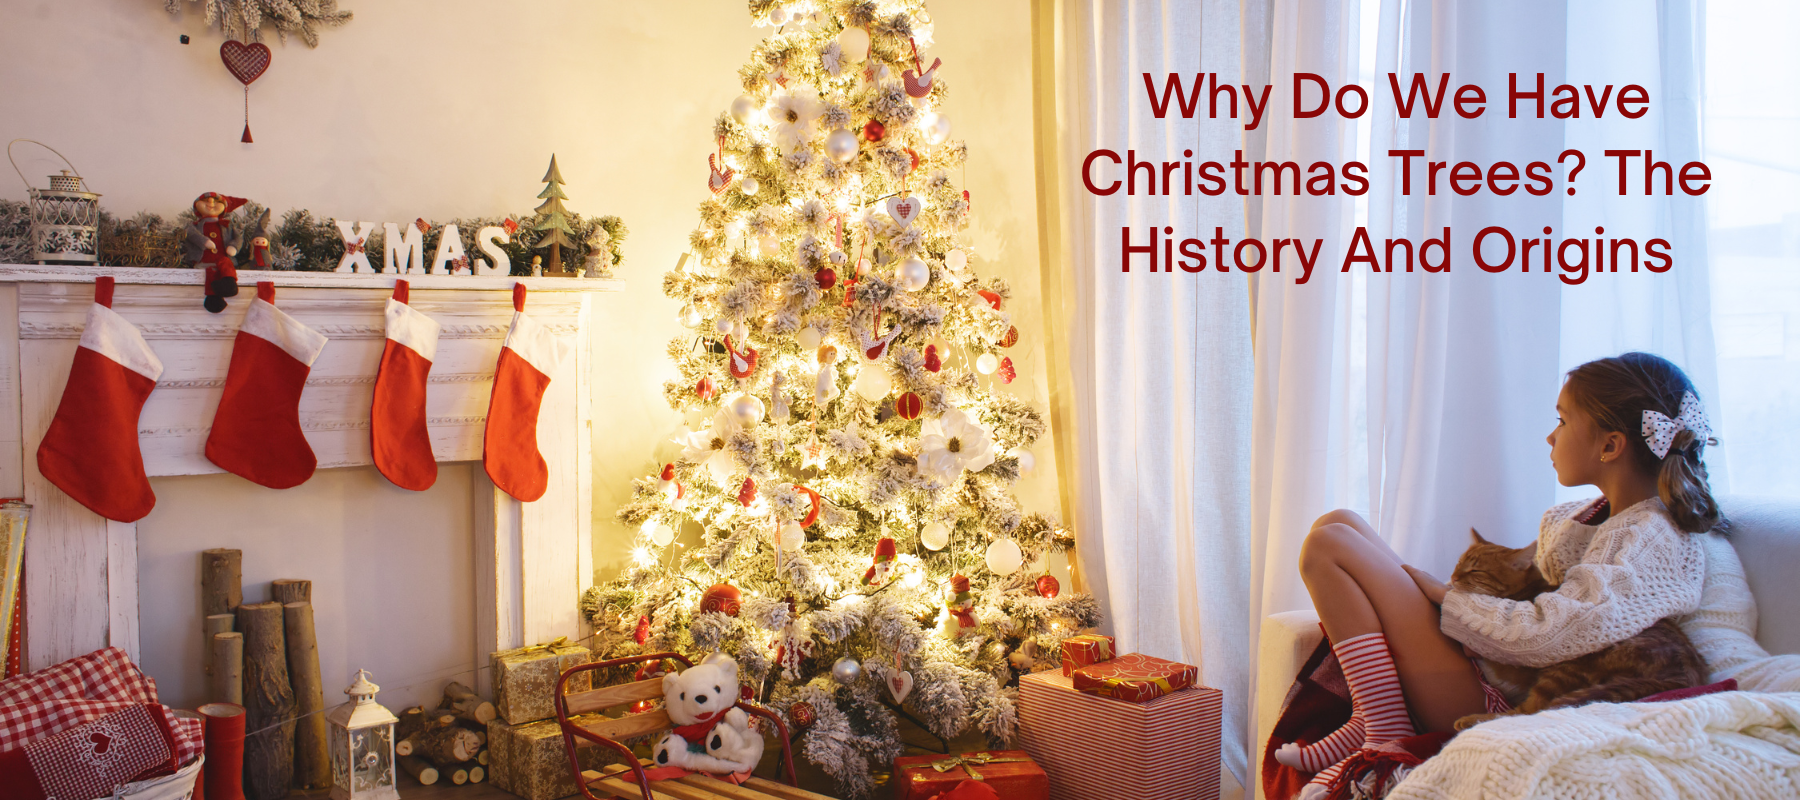 Why Do We Have Christmas Trees? The History And Origins